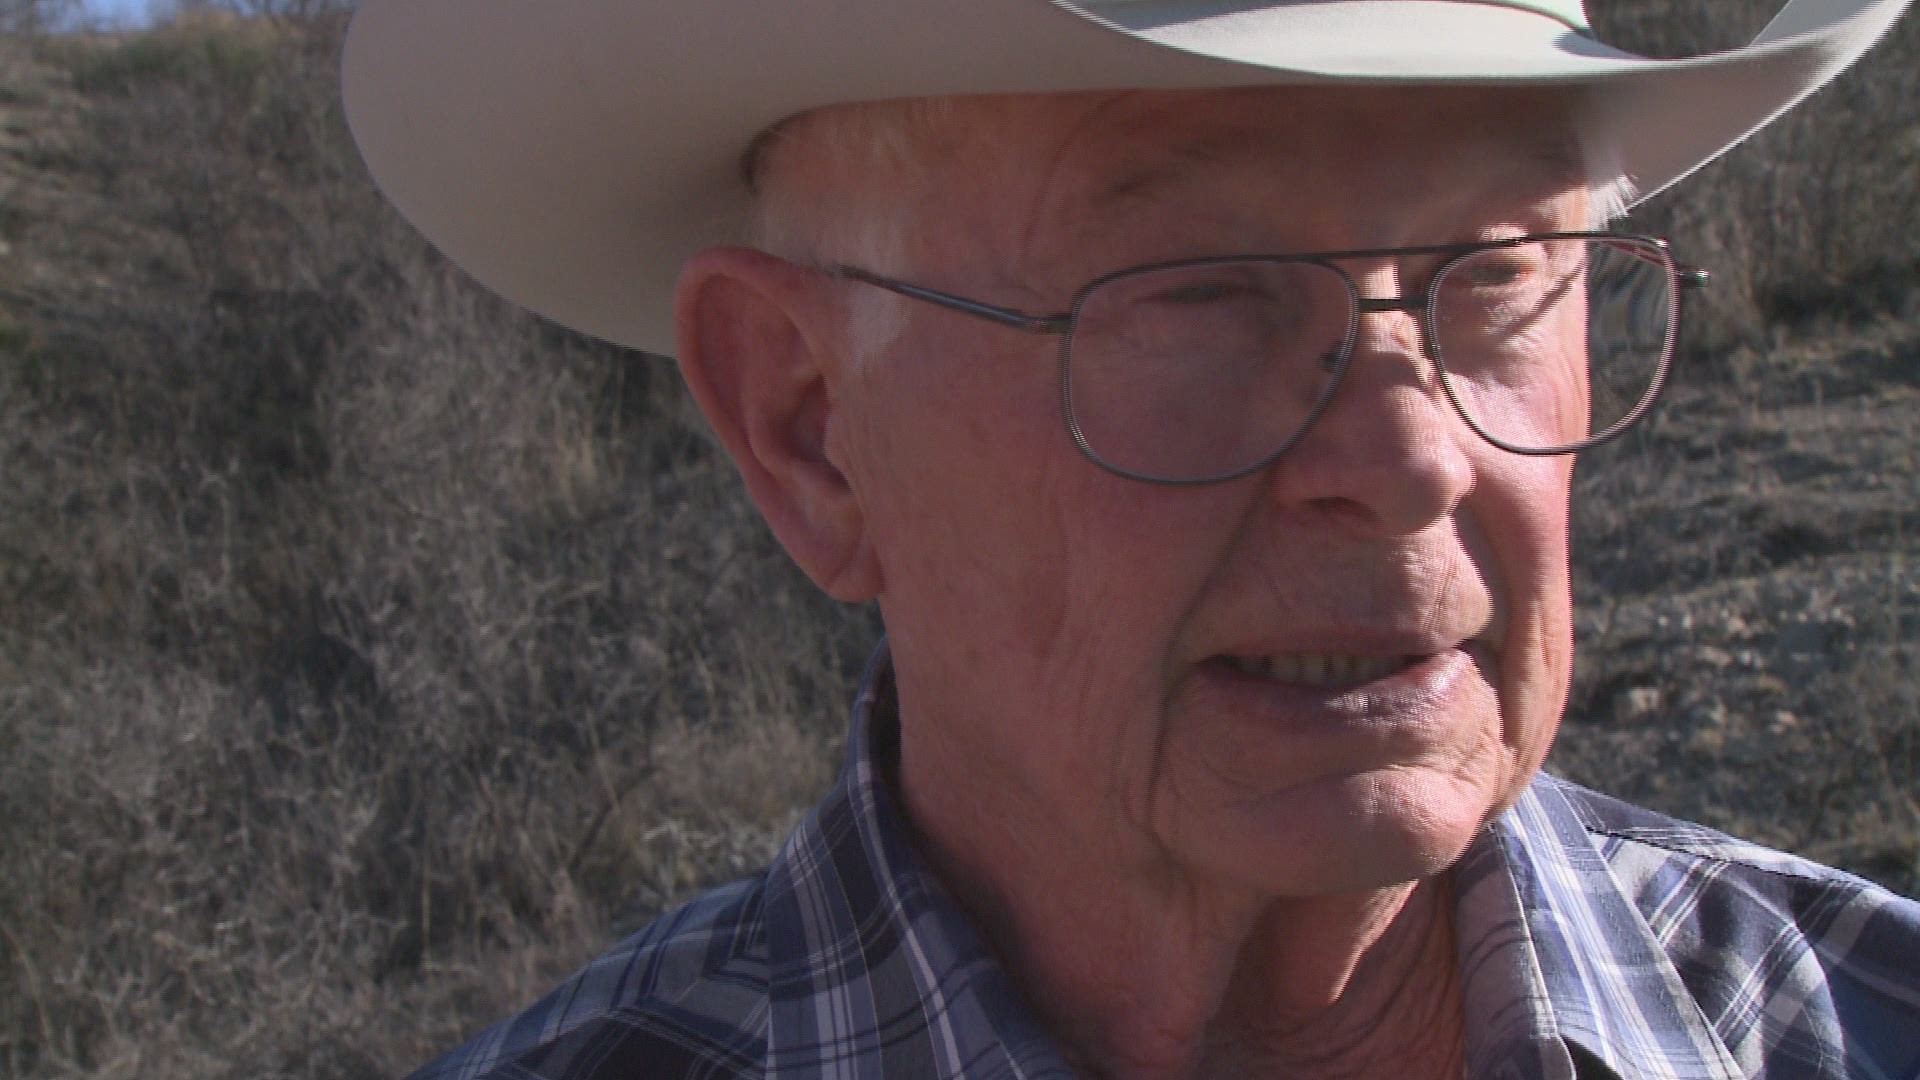 A Southern Arizona rancher described close encounters he's had with the Sinaloa cartel.